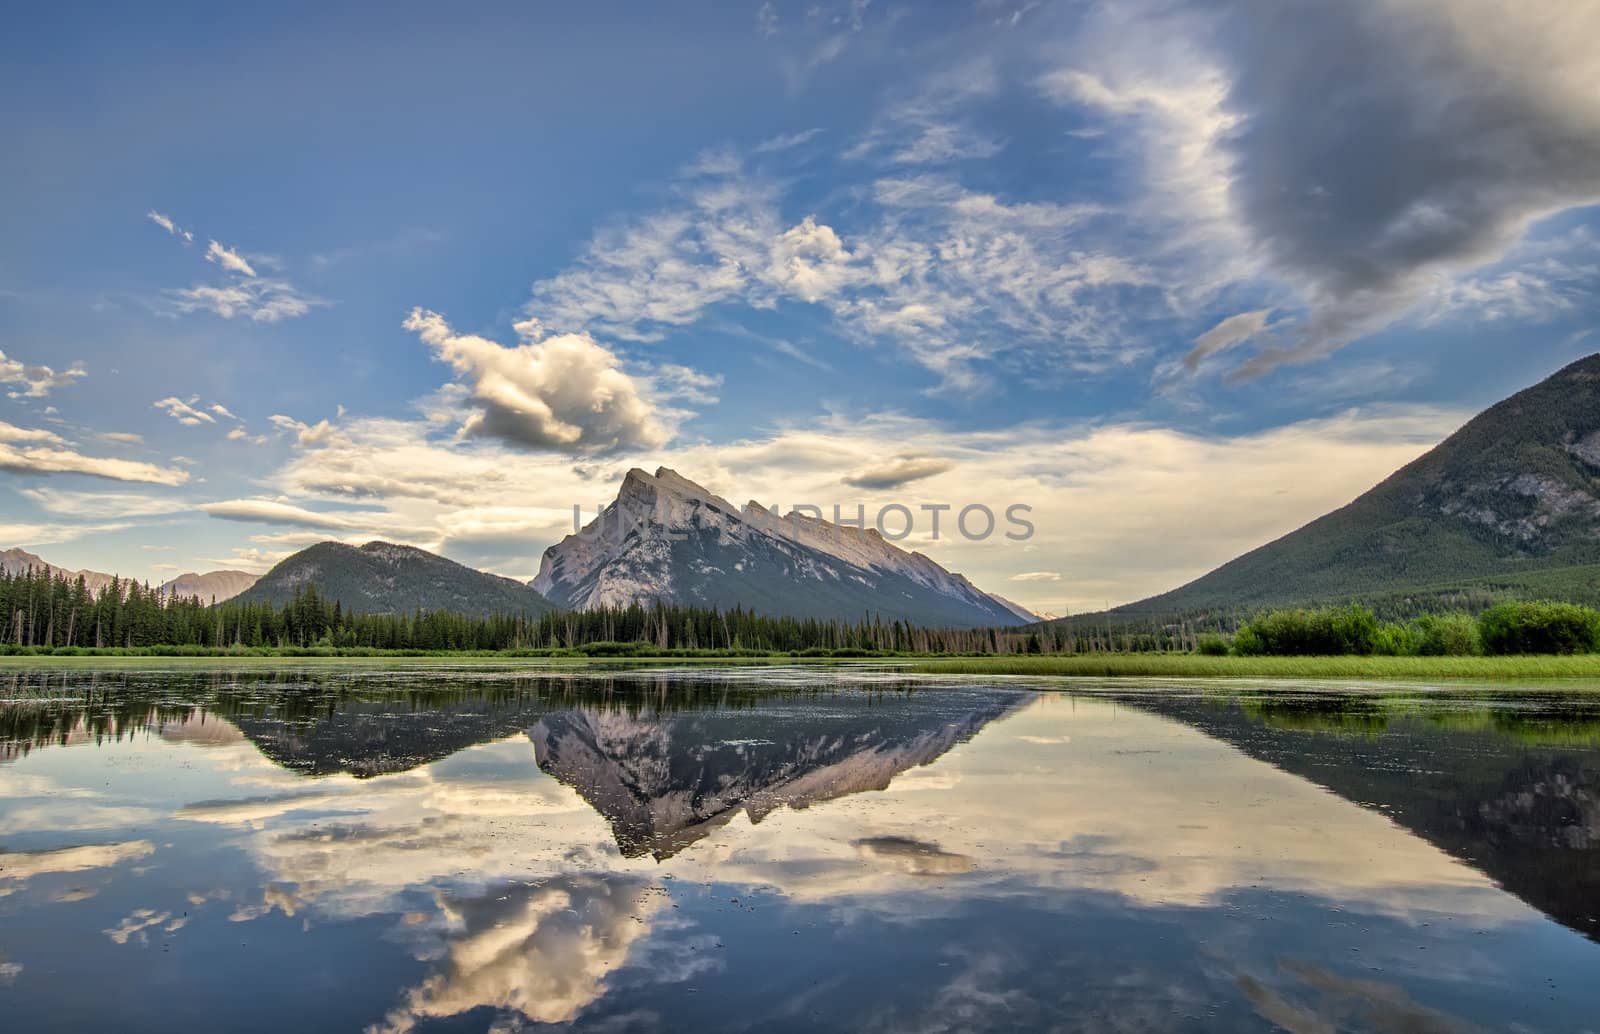 A perfect reflection of the rocky mountains in Vermilion lakes, in Banff National Park Canada.